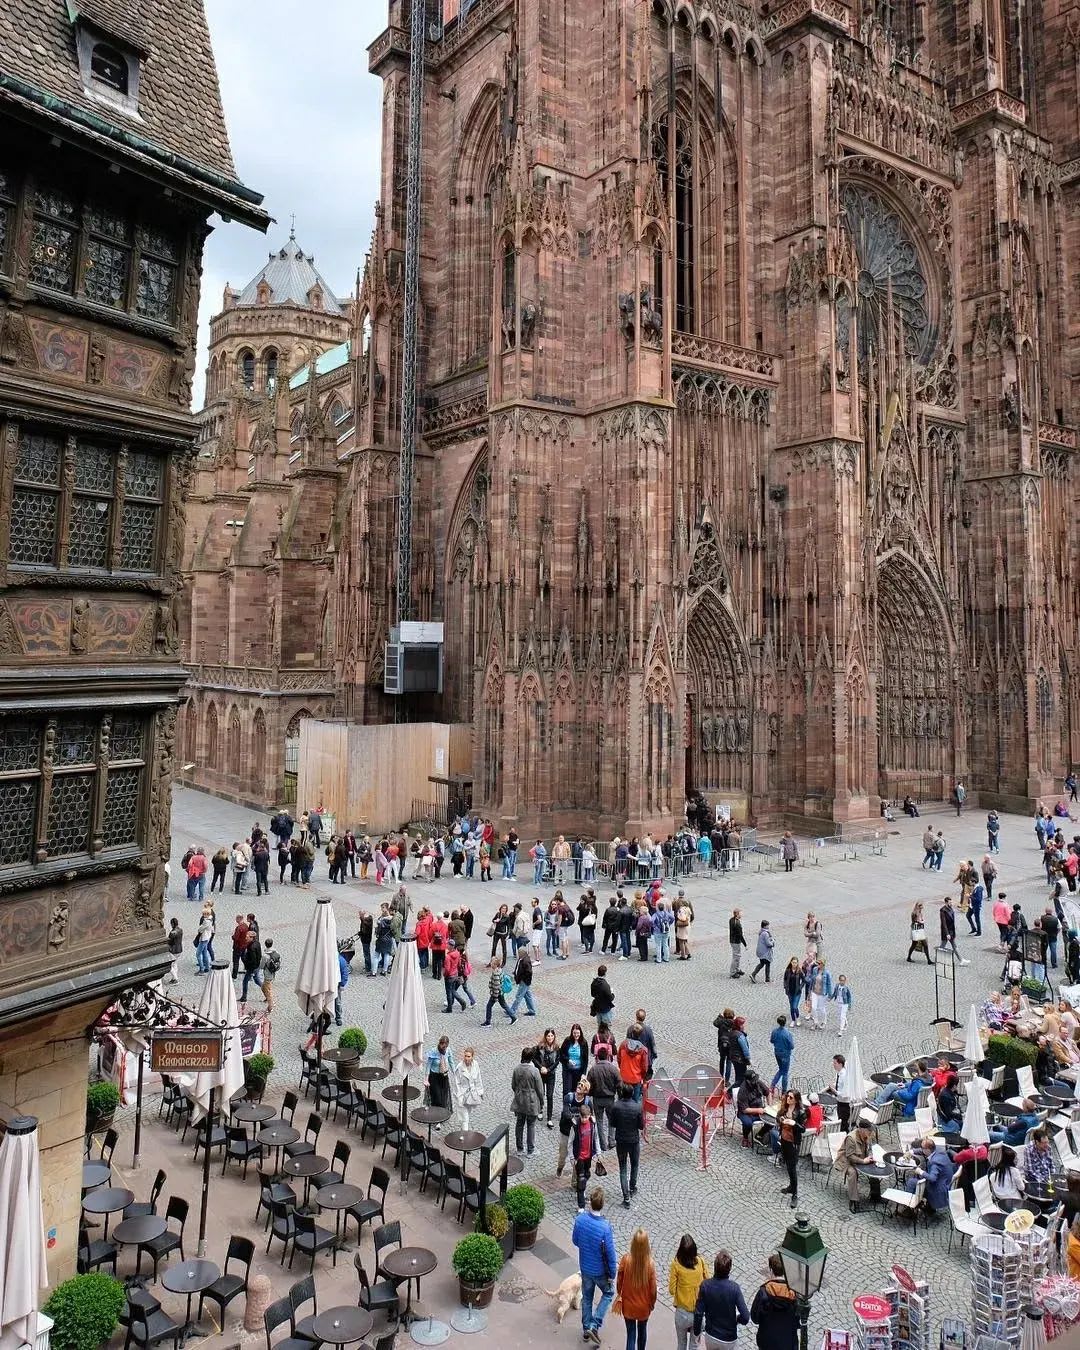 The Gothic facade of the massive Strasbourg Cathedral, built between 1015 and 1439 on the Grande Île island in the historic center of Strasbourg, Grand Est, France.